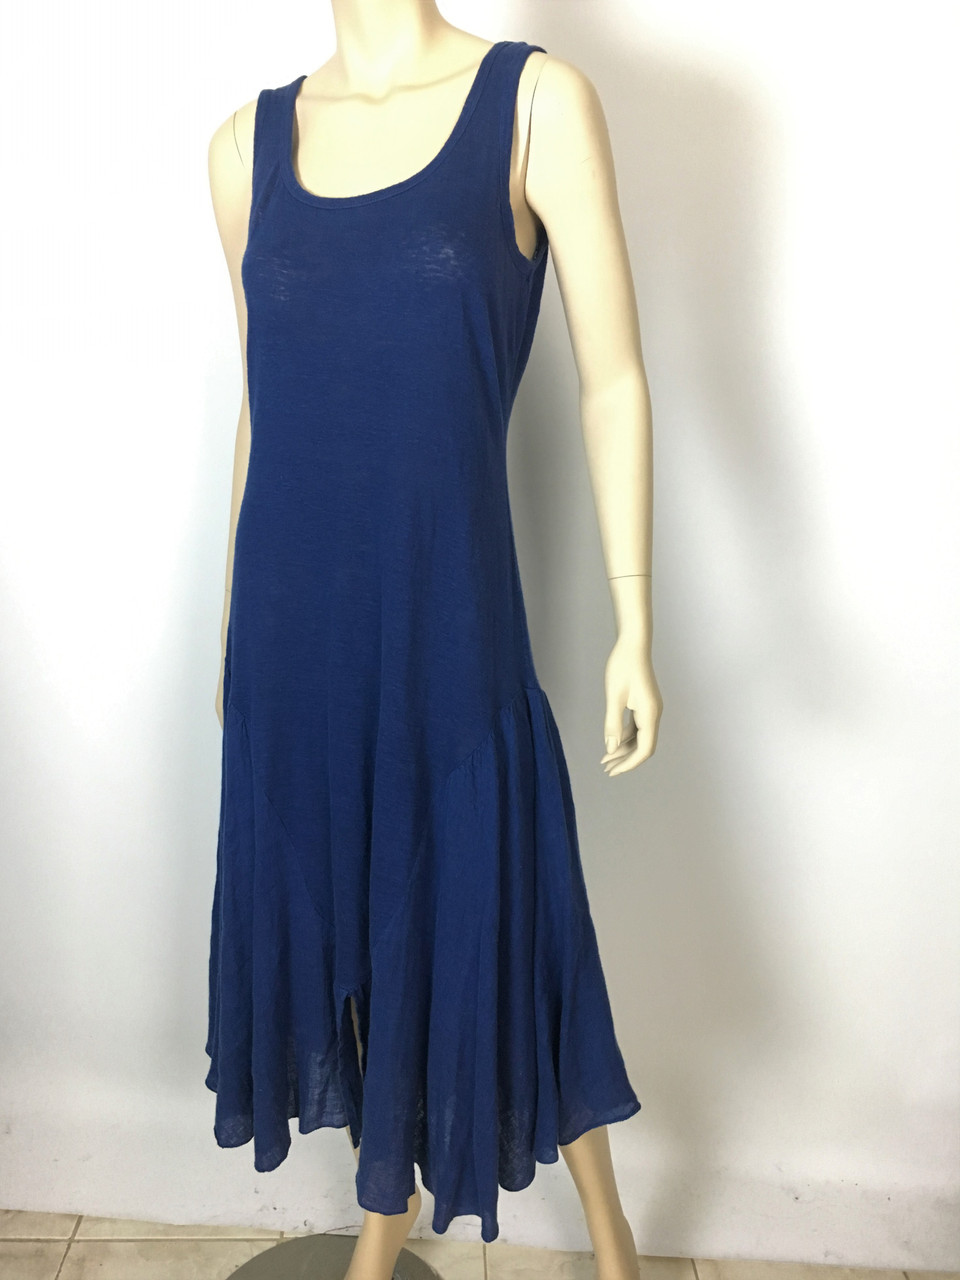 Cool & Chic Linen Dress by Color Me Cotton Navy Blue Small